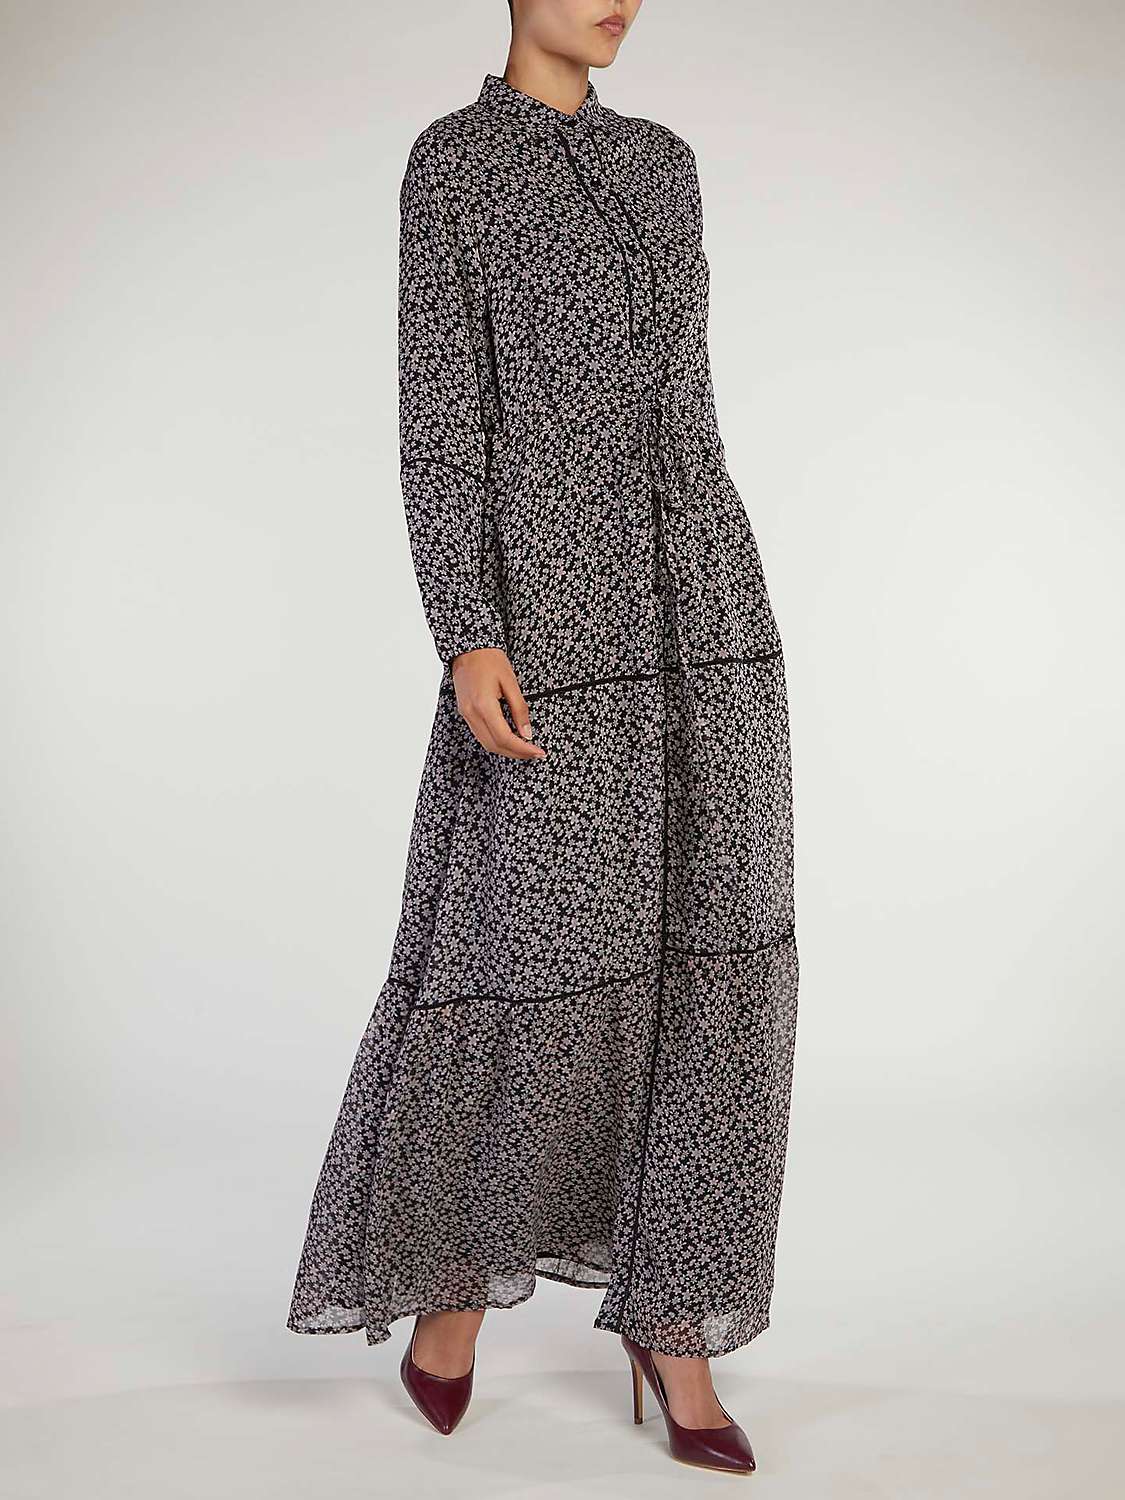 Buy Aab Floral Tiered Shirt Maxi Dress, Black/Multi Online at johnlewis.com